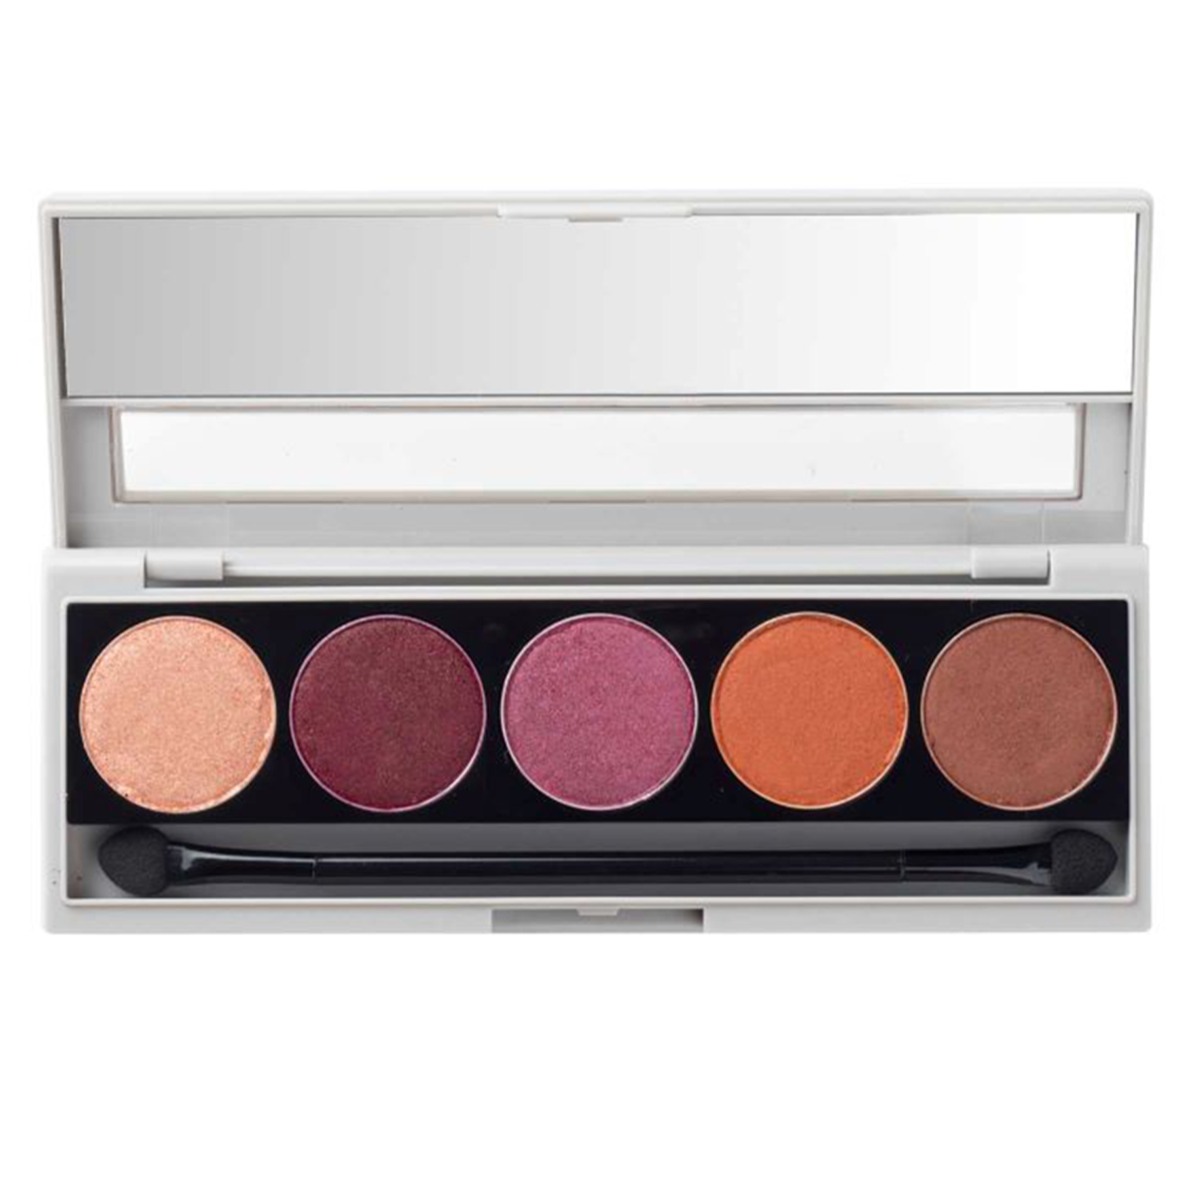 BlushBee Organic Beauty Eyeshadow Palette (5 shades), 11.5gm-Gala Ombre